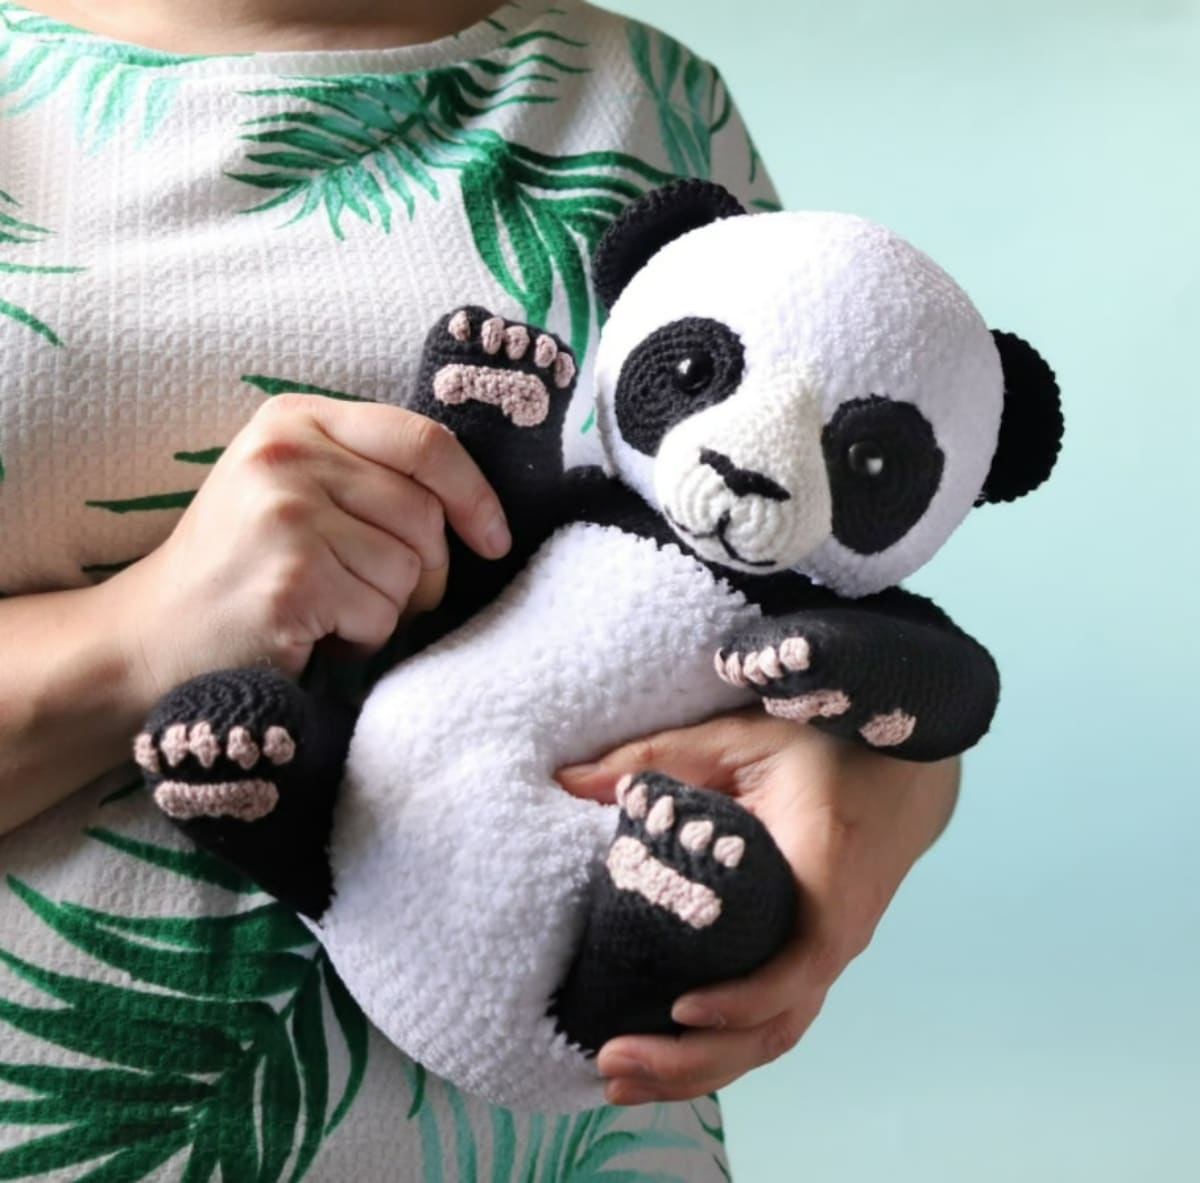 Large crochet and stuffed black and white panda with pink paws and feet being held like a bay by a woman in a pink and green top.